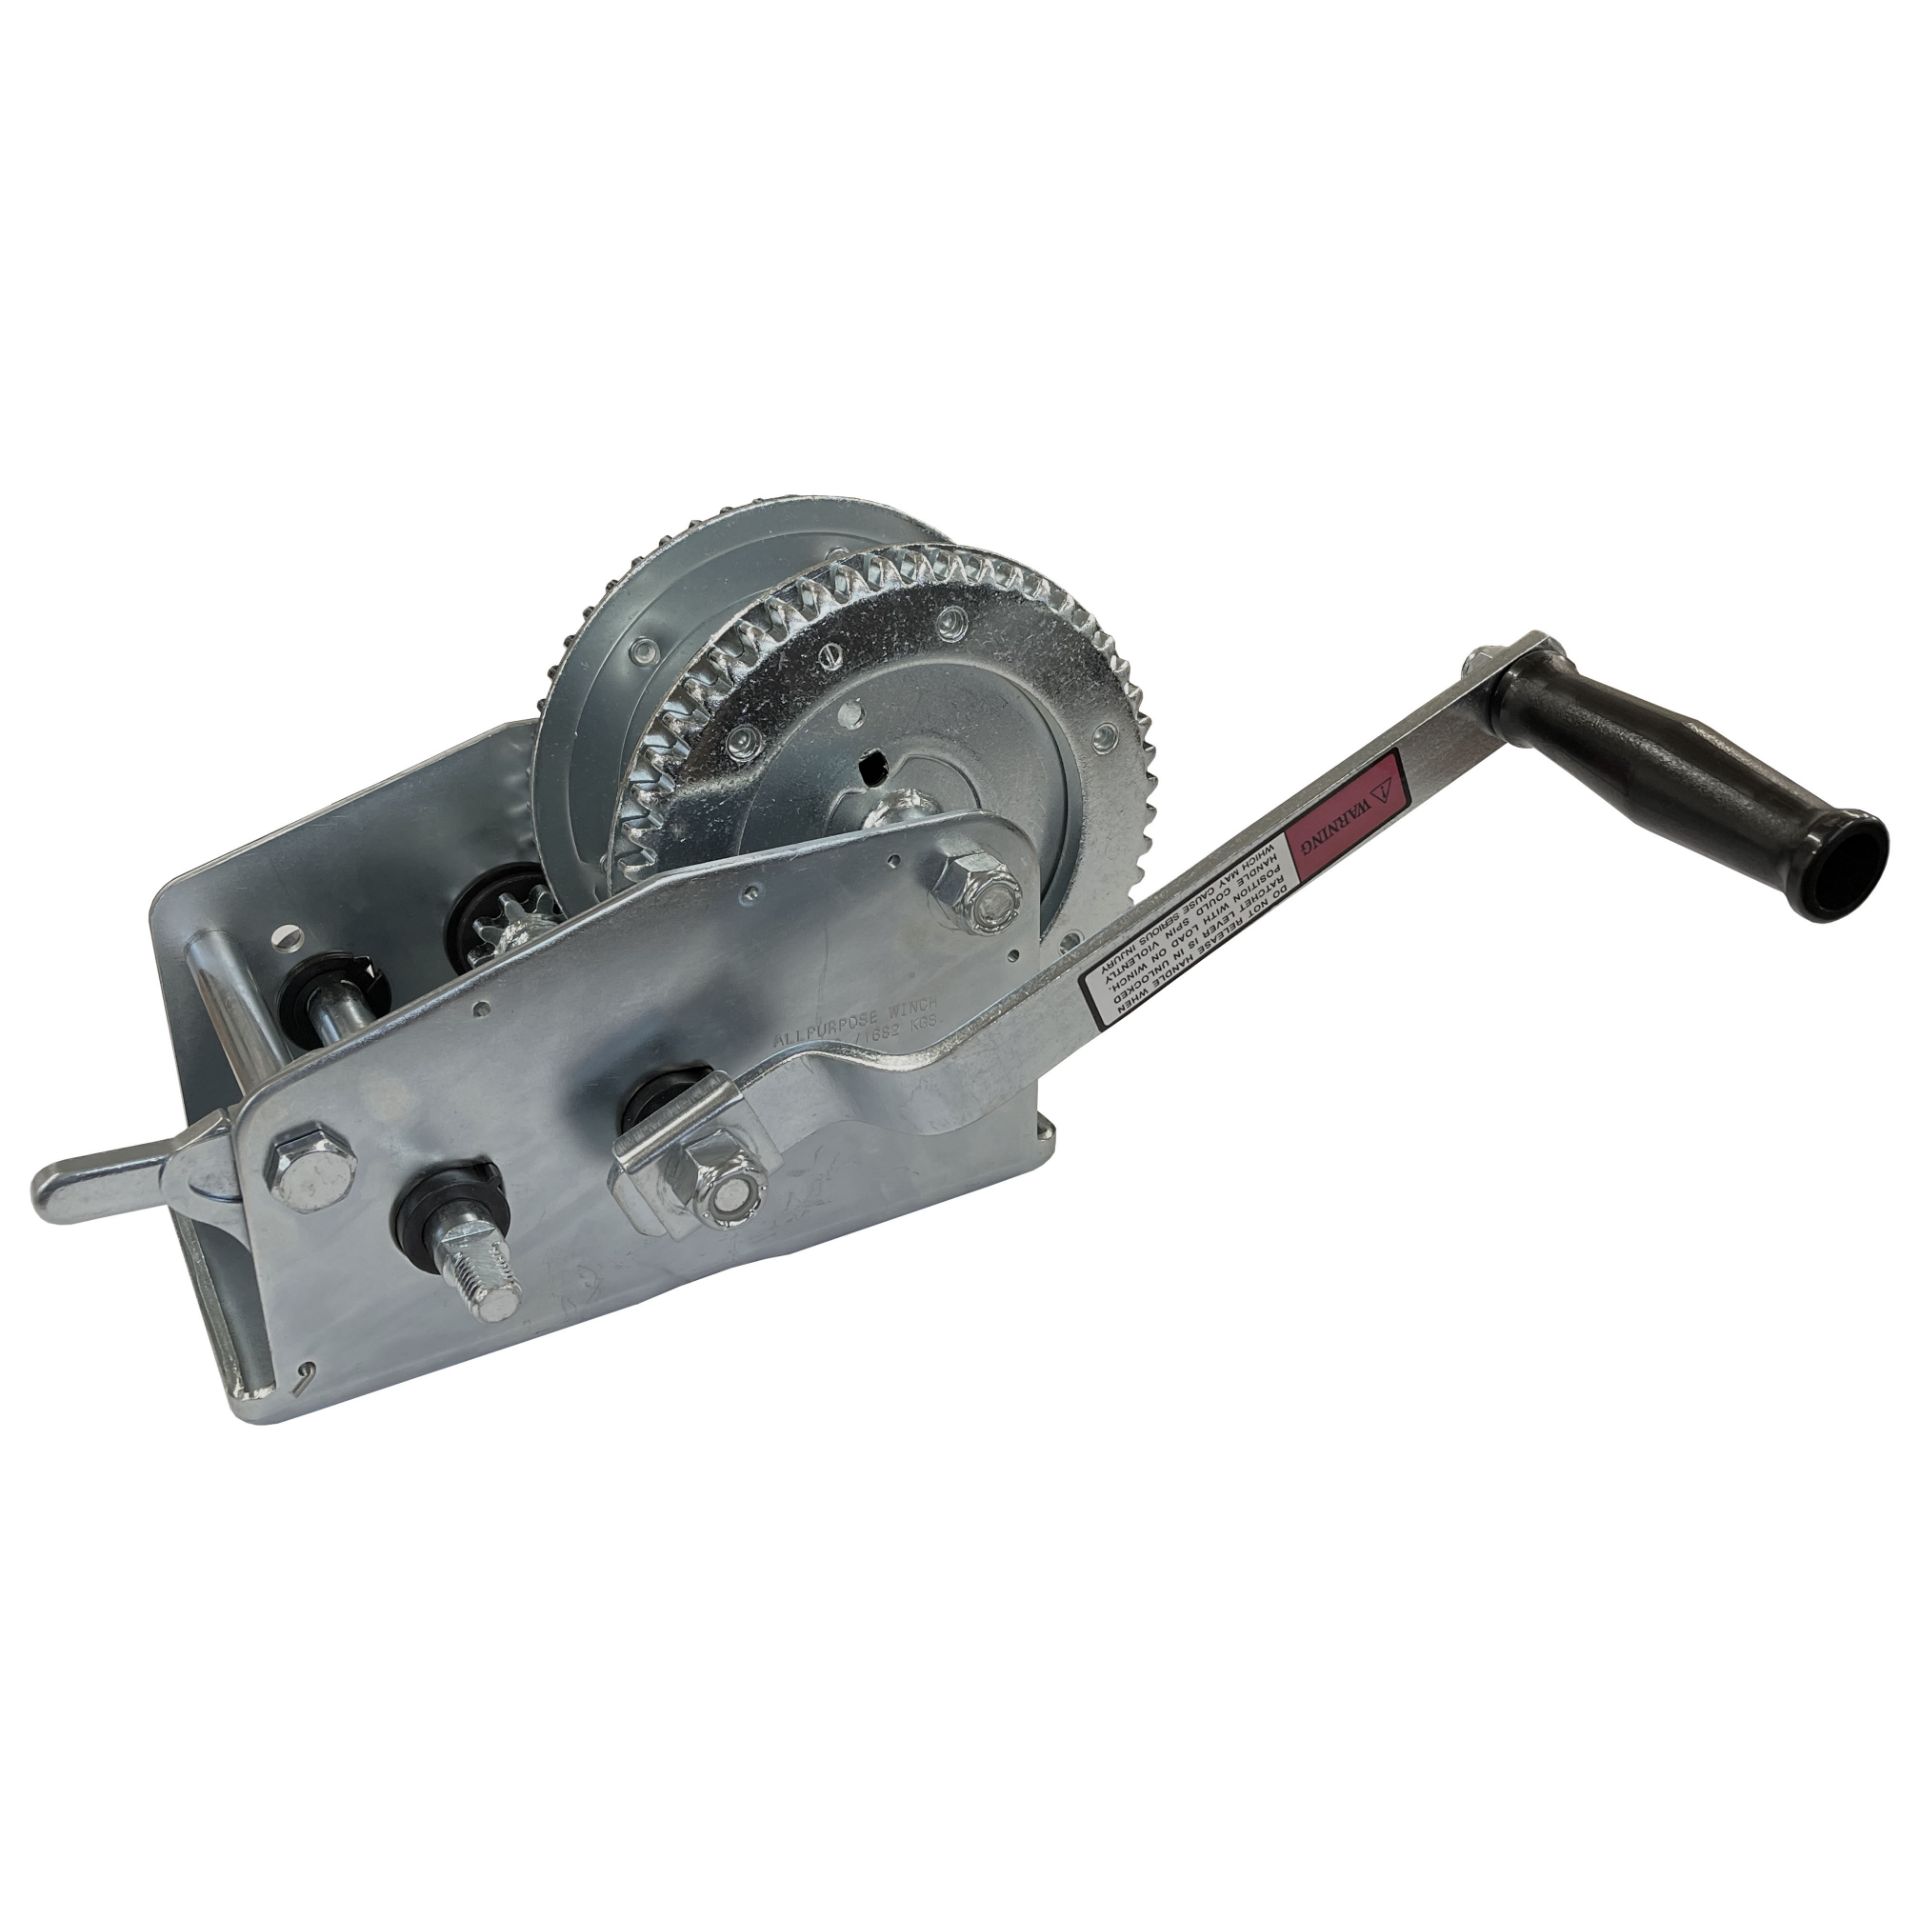 10 X 2500Lbs Zinc Plated Hand Winch (Not For Lifting) (Hw25)